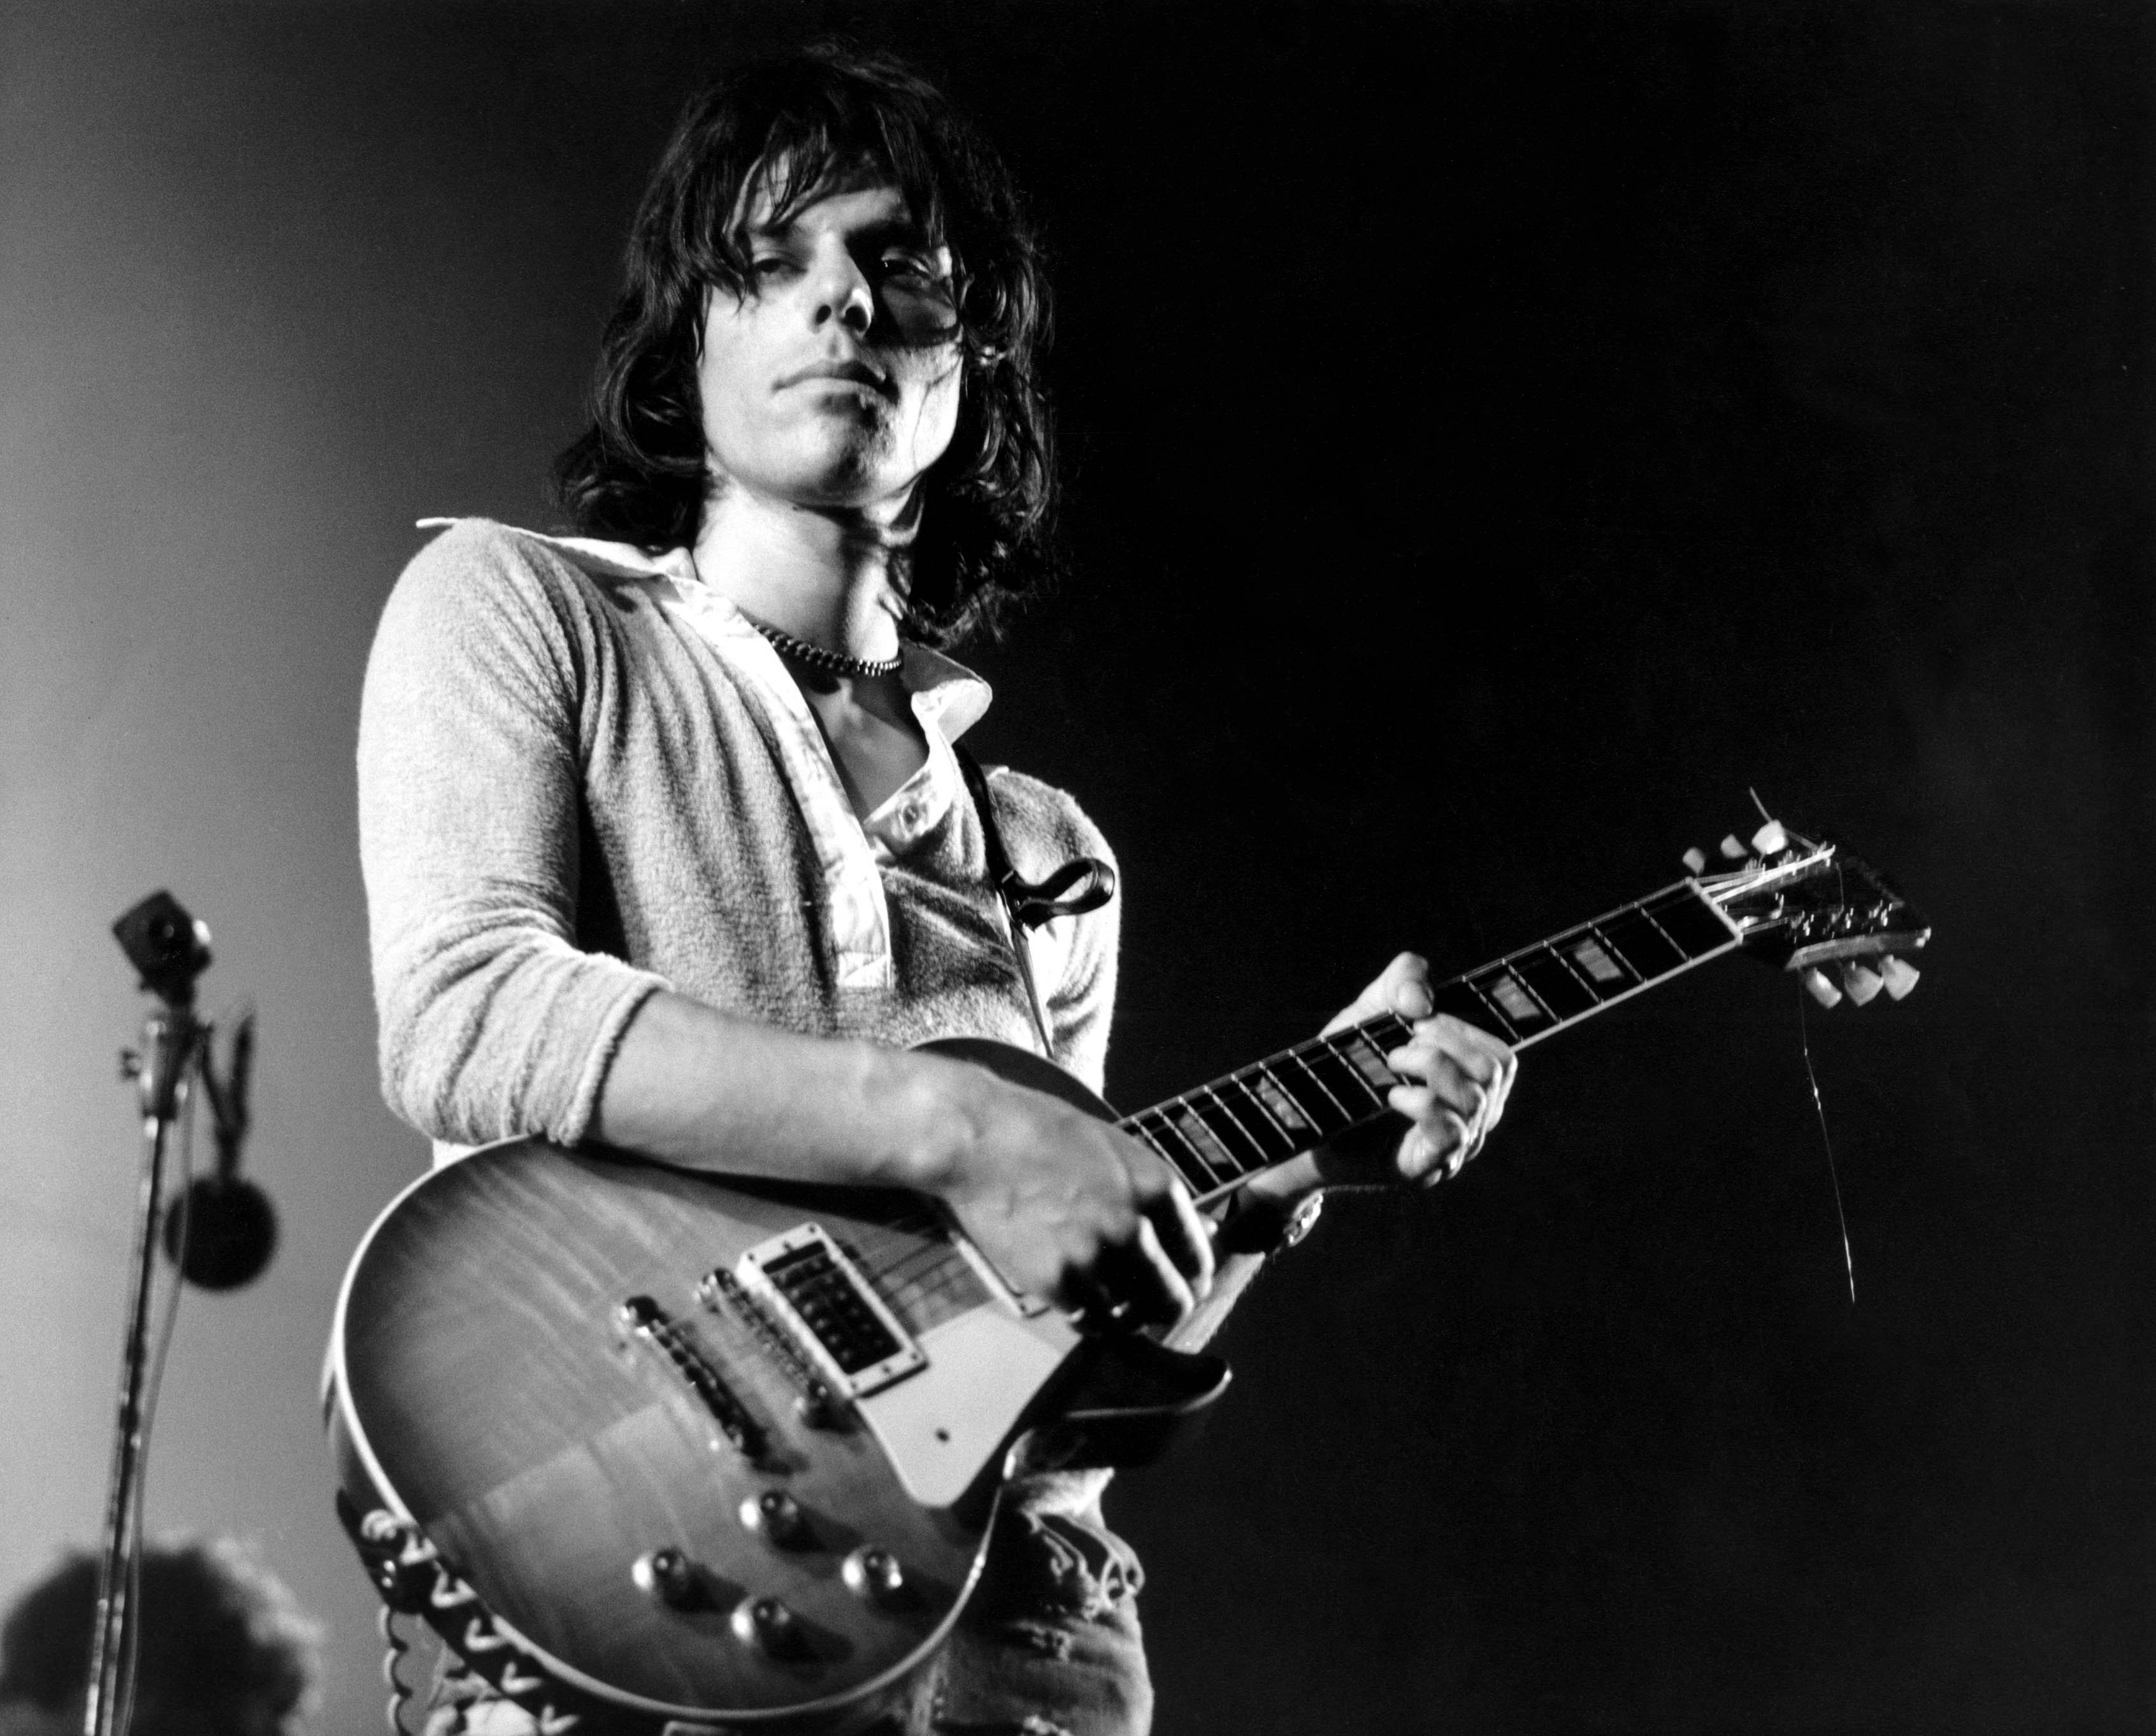 Jeff Beck of The Jeff Beck Group is pictured as he performs live on stage playing a Gibson Les Paul guitar at the Newport Jazz Festival on July 4, 1969, in Newport, Rhode Island | Source: Getty Images